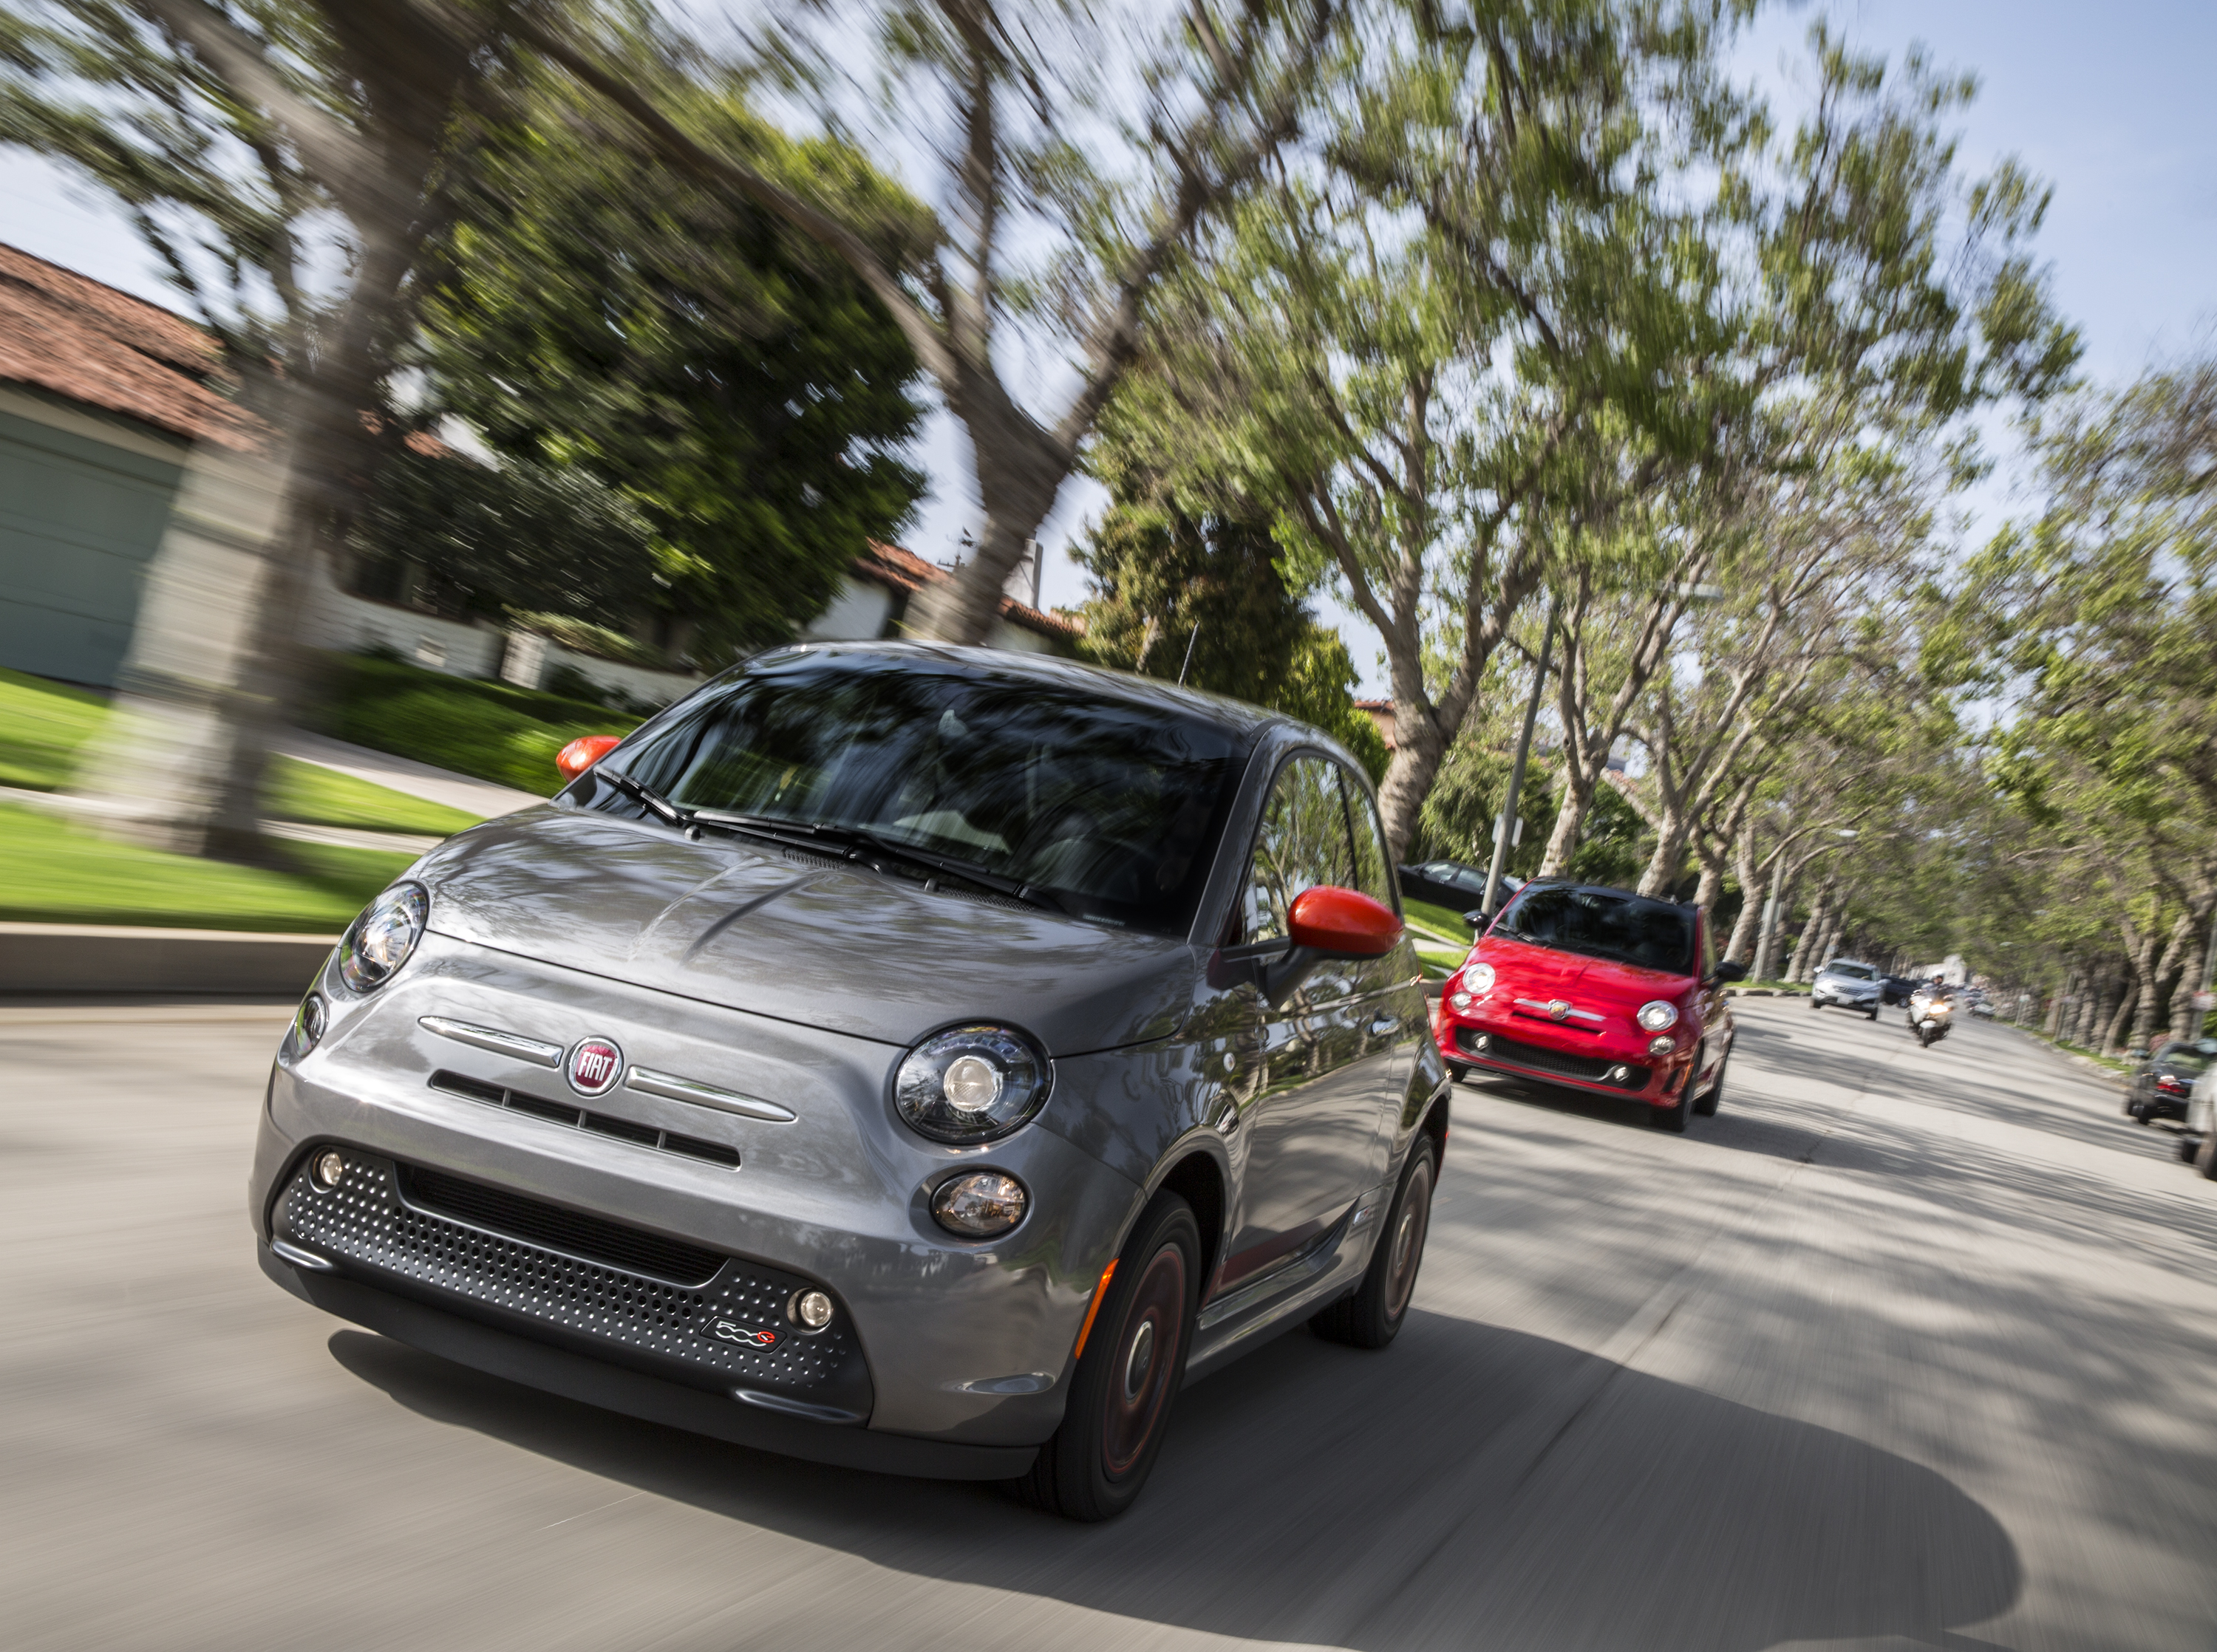 Fiat is Pulling the 500 and 500e from the U.S. Market